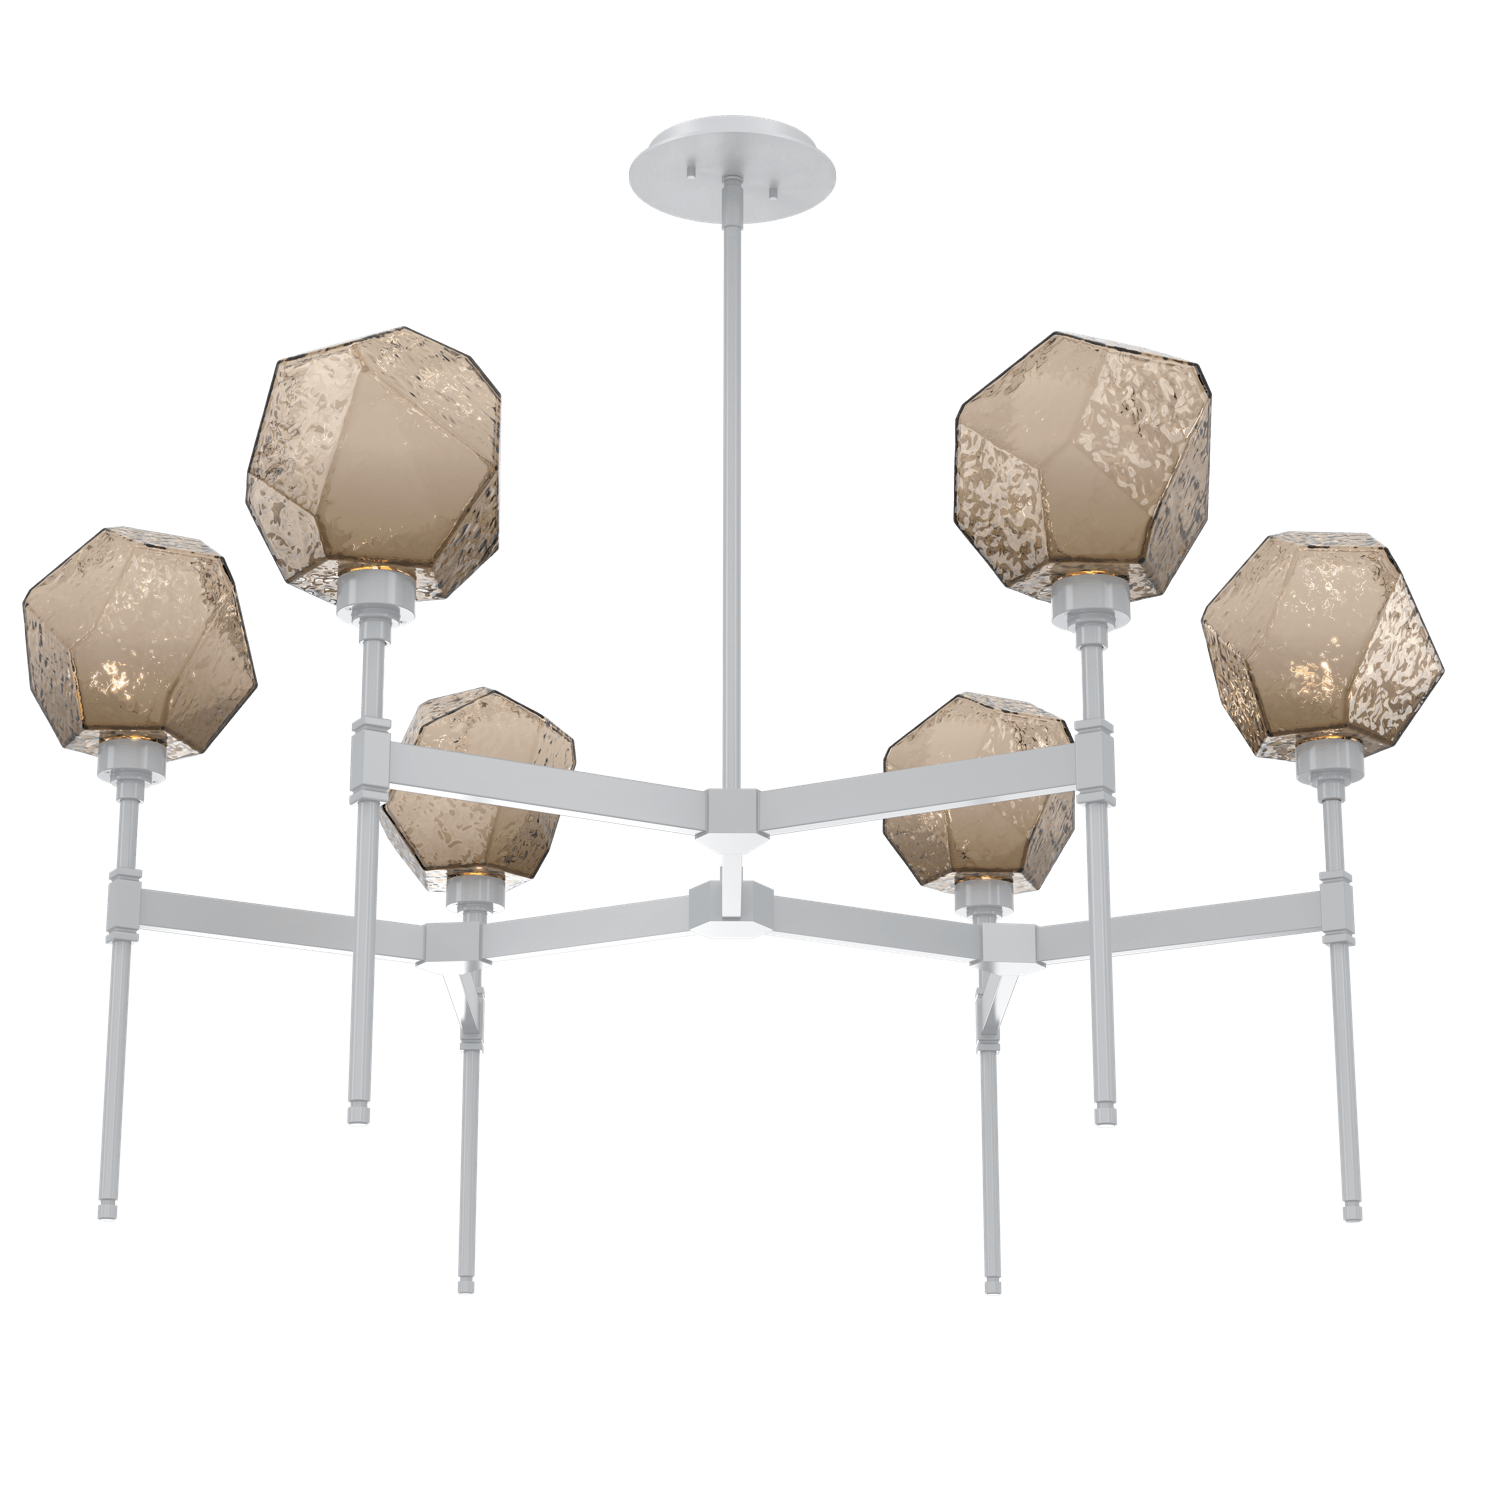 CHB0039-39-CS-B-Hammerton-Studio-Gem-round-belvedere-chandelier-with-classic-silver-finish-and-bronze-blown-glass-shades-and-LED-lamping